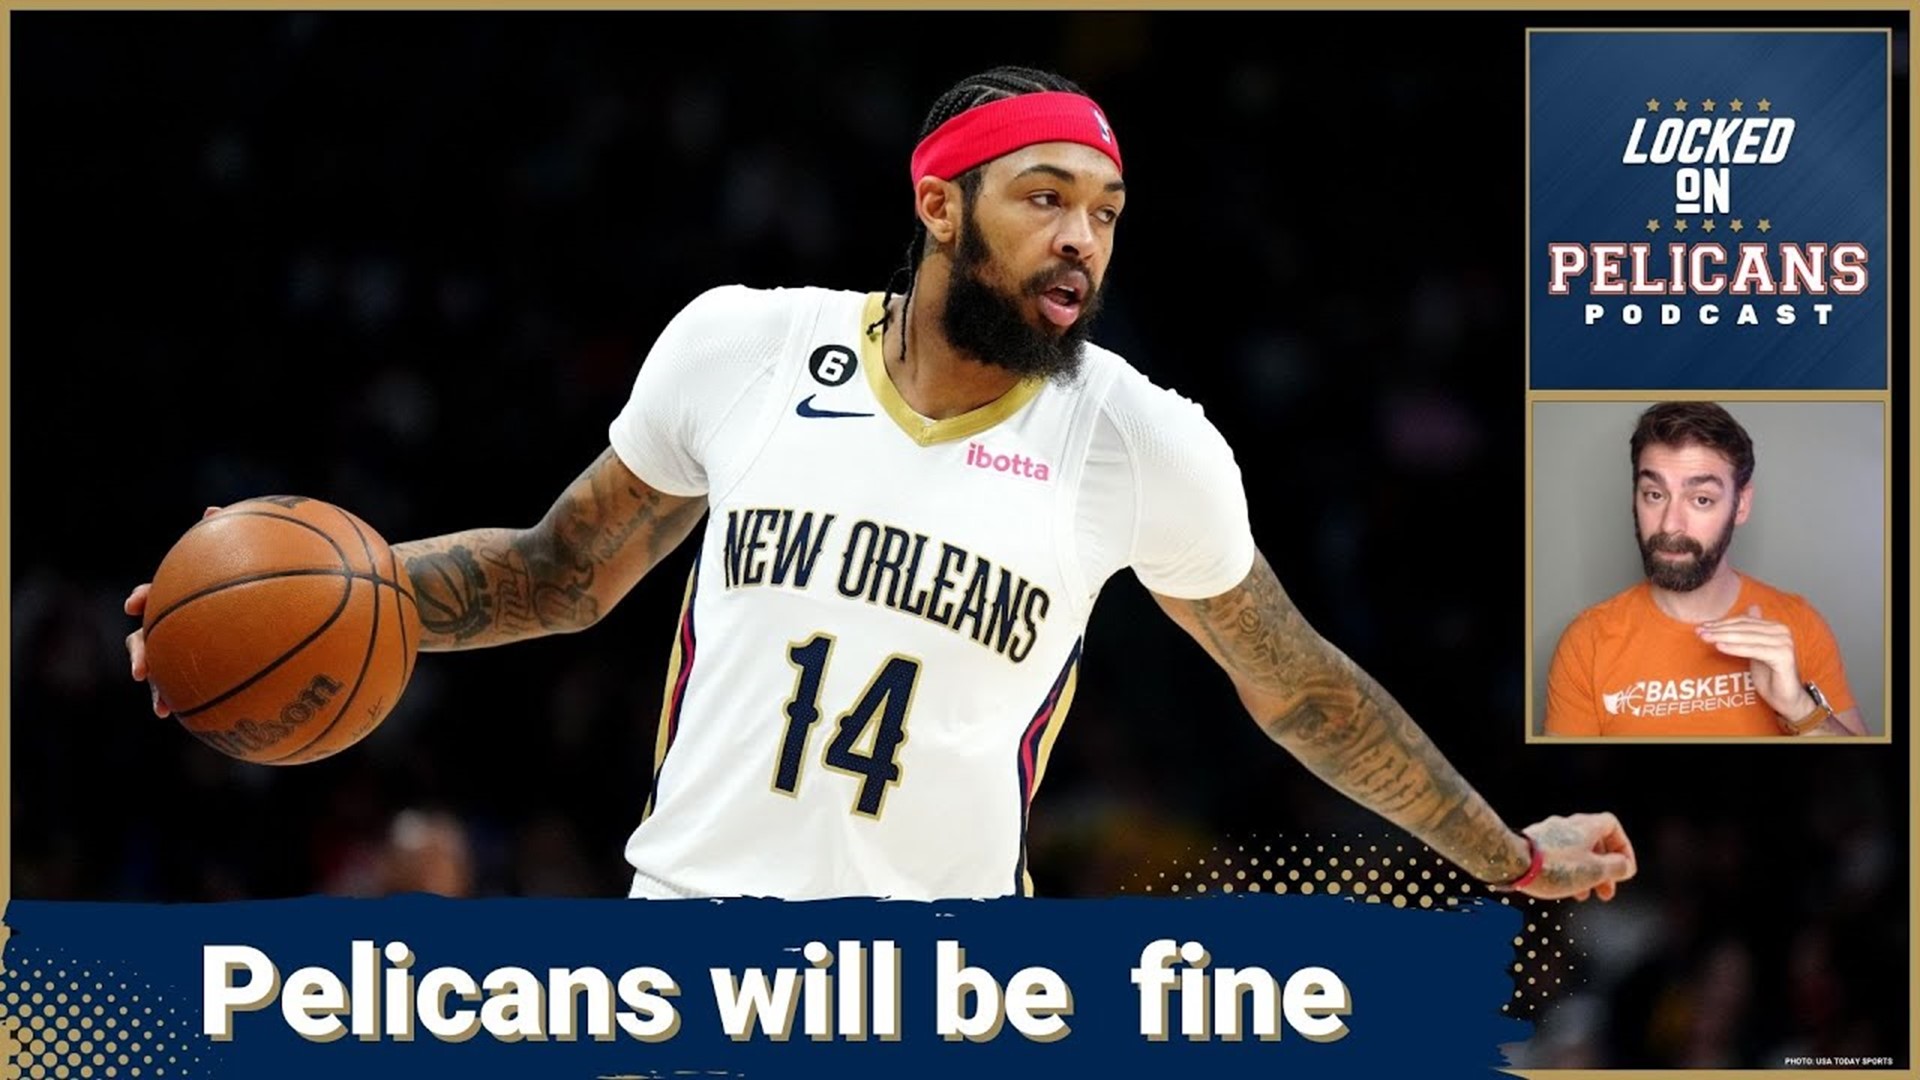 The New Orleans Pelicans are now on a 9 game losing streak without Zion Williamson. But is it time to panic?